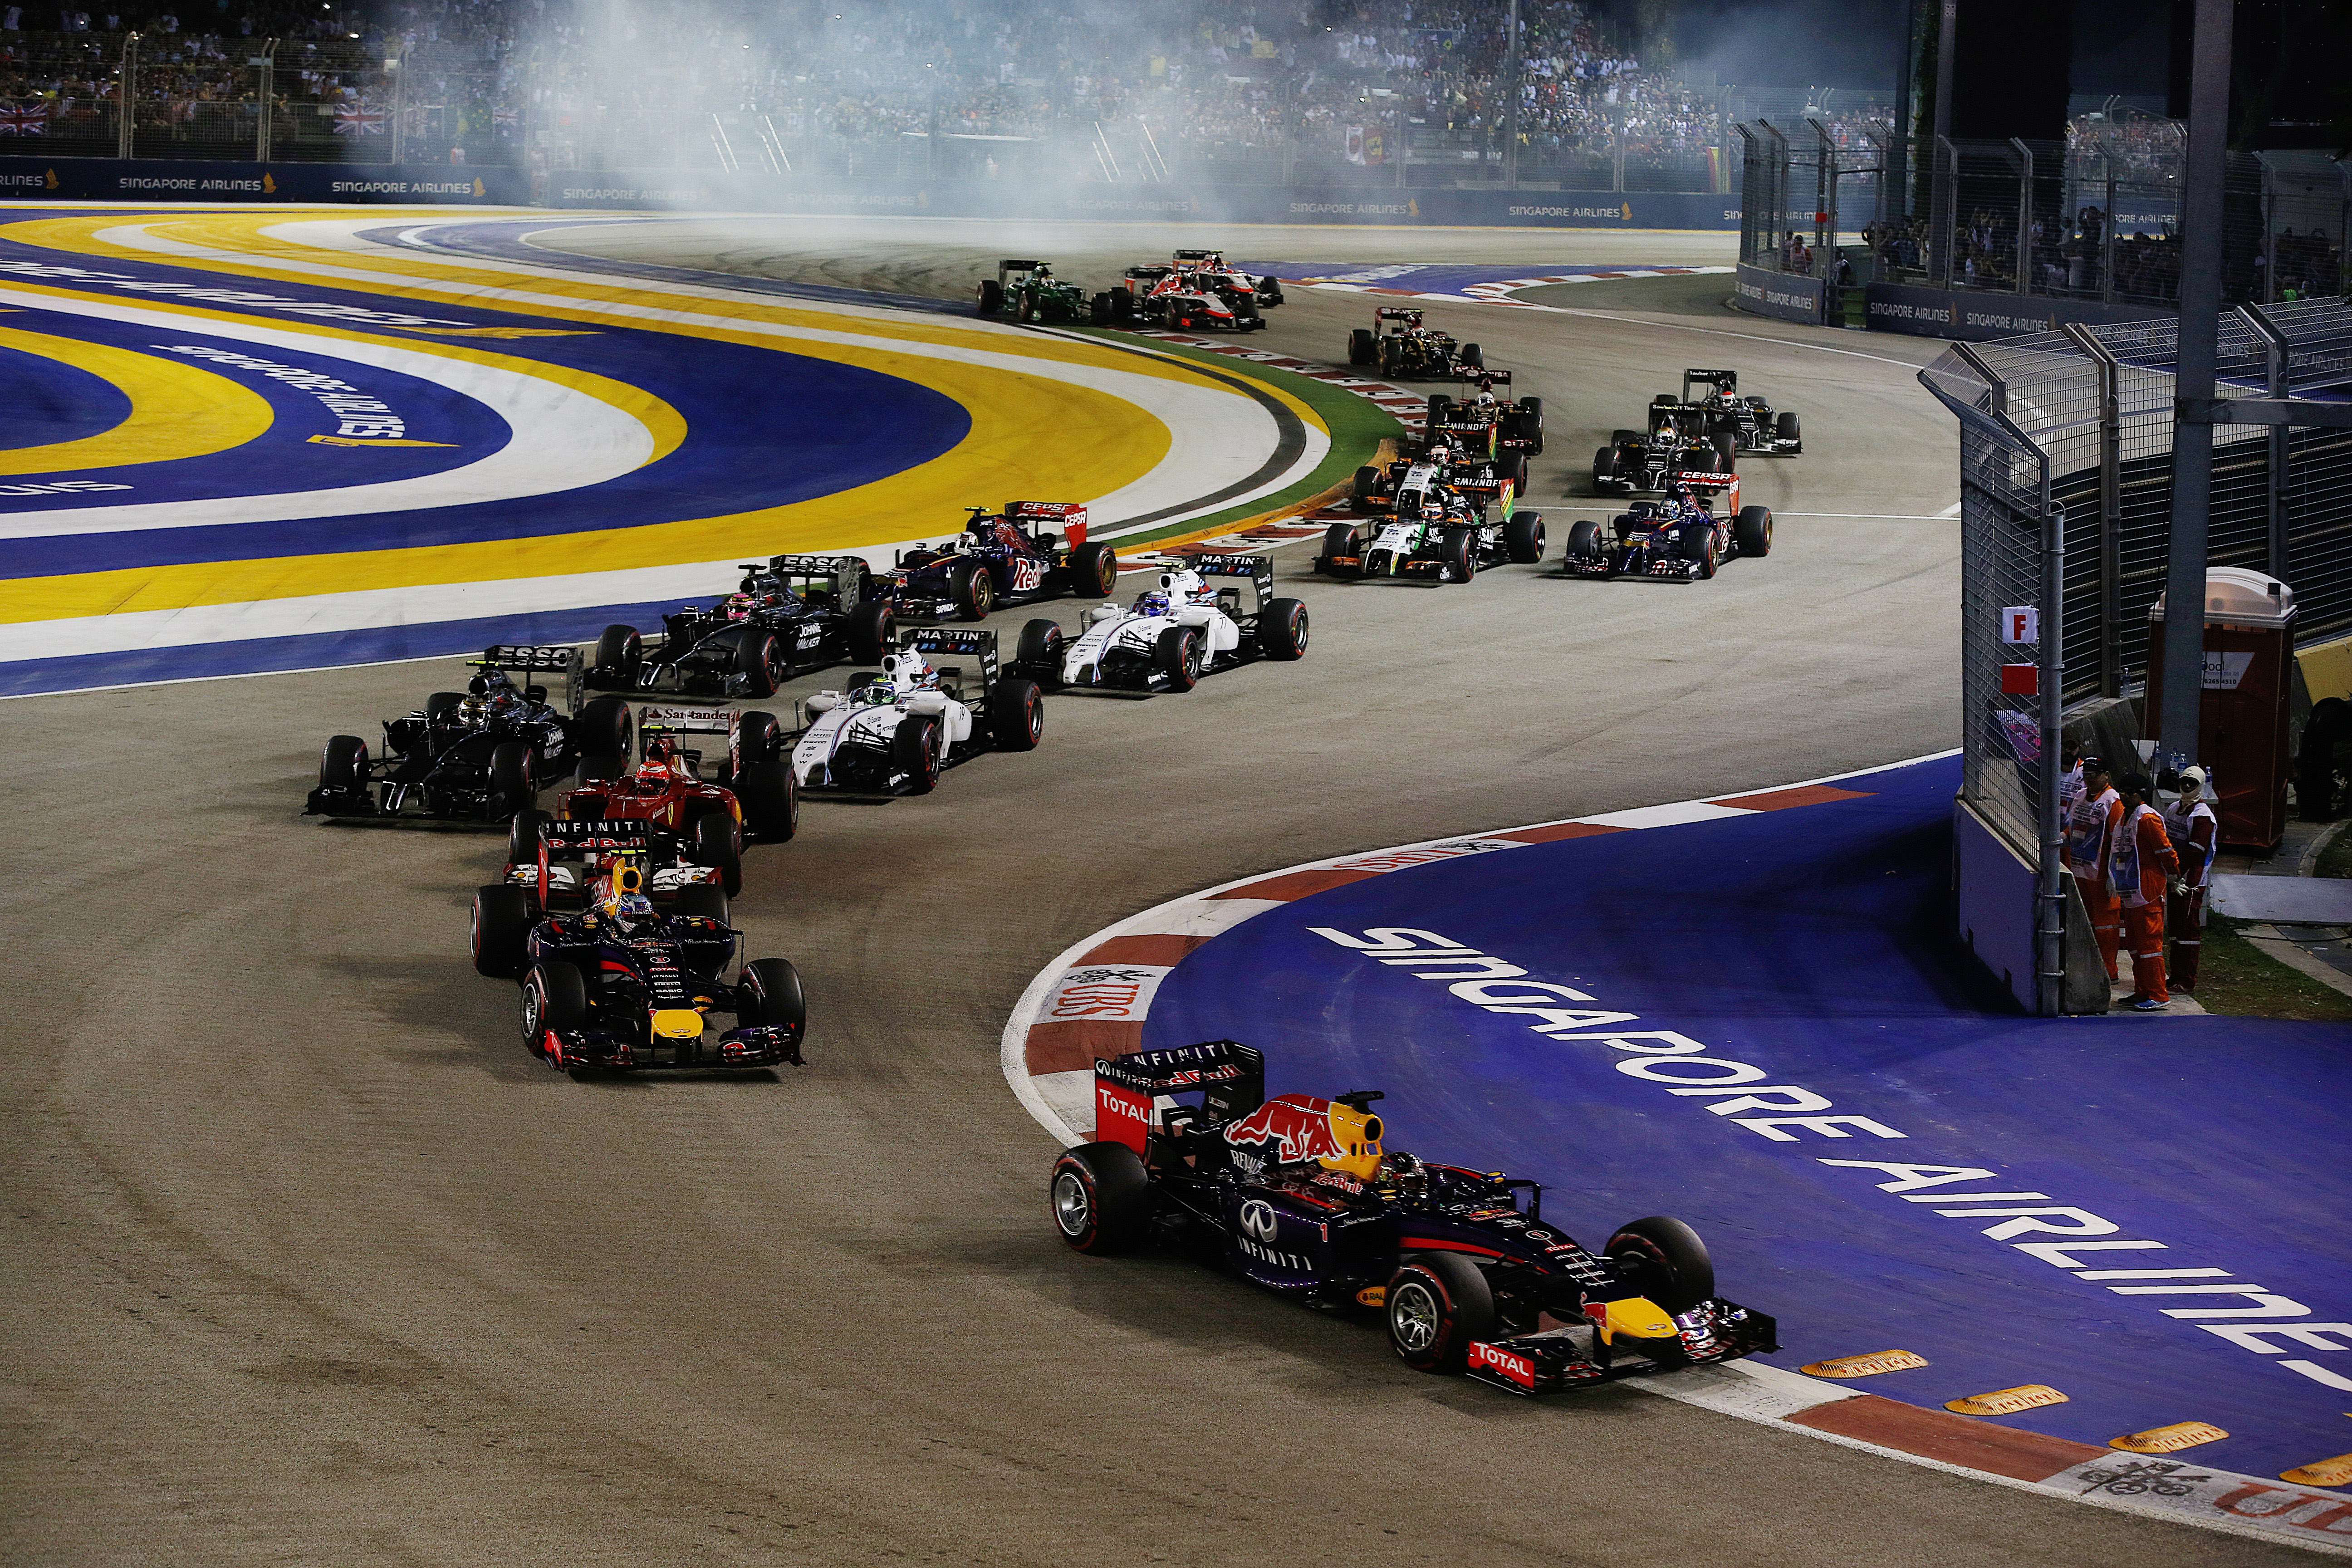 Night action at the Singapore Formula One Grand Prix. Photo: SCMP Pictures